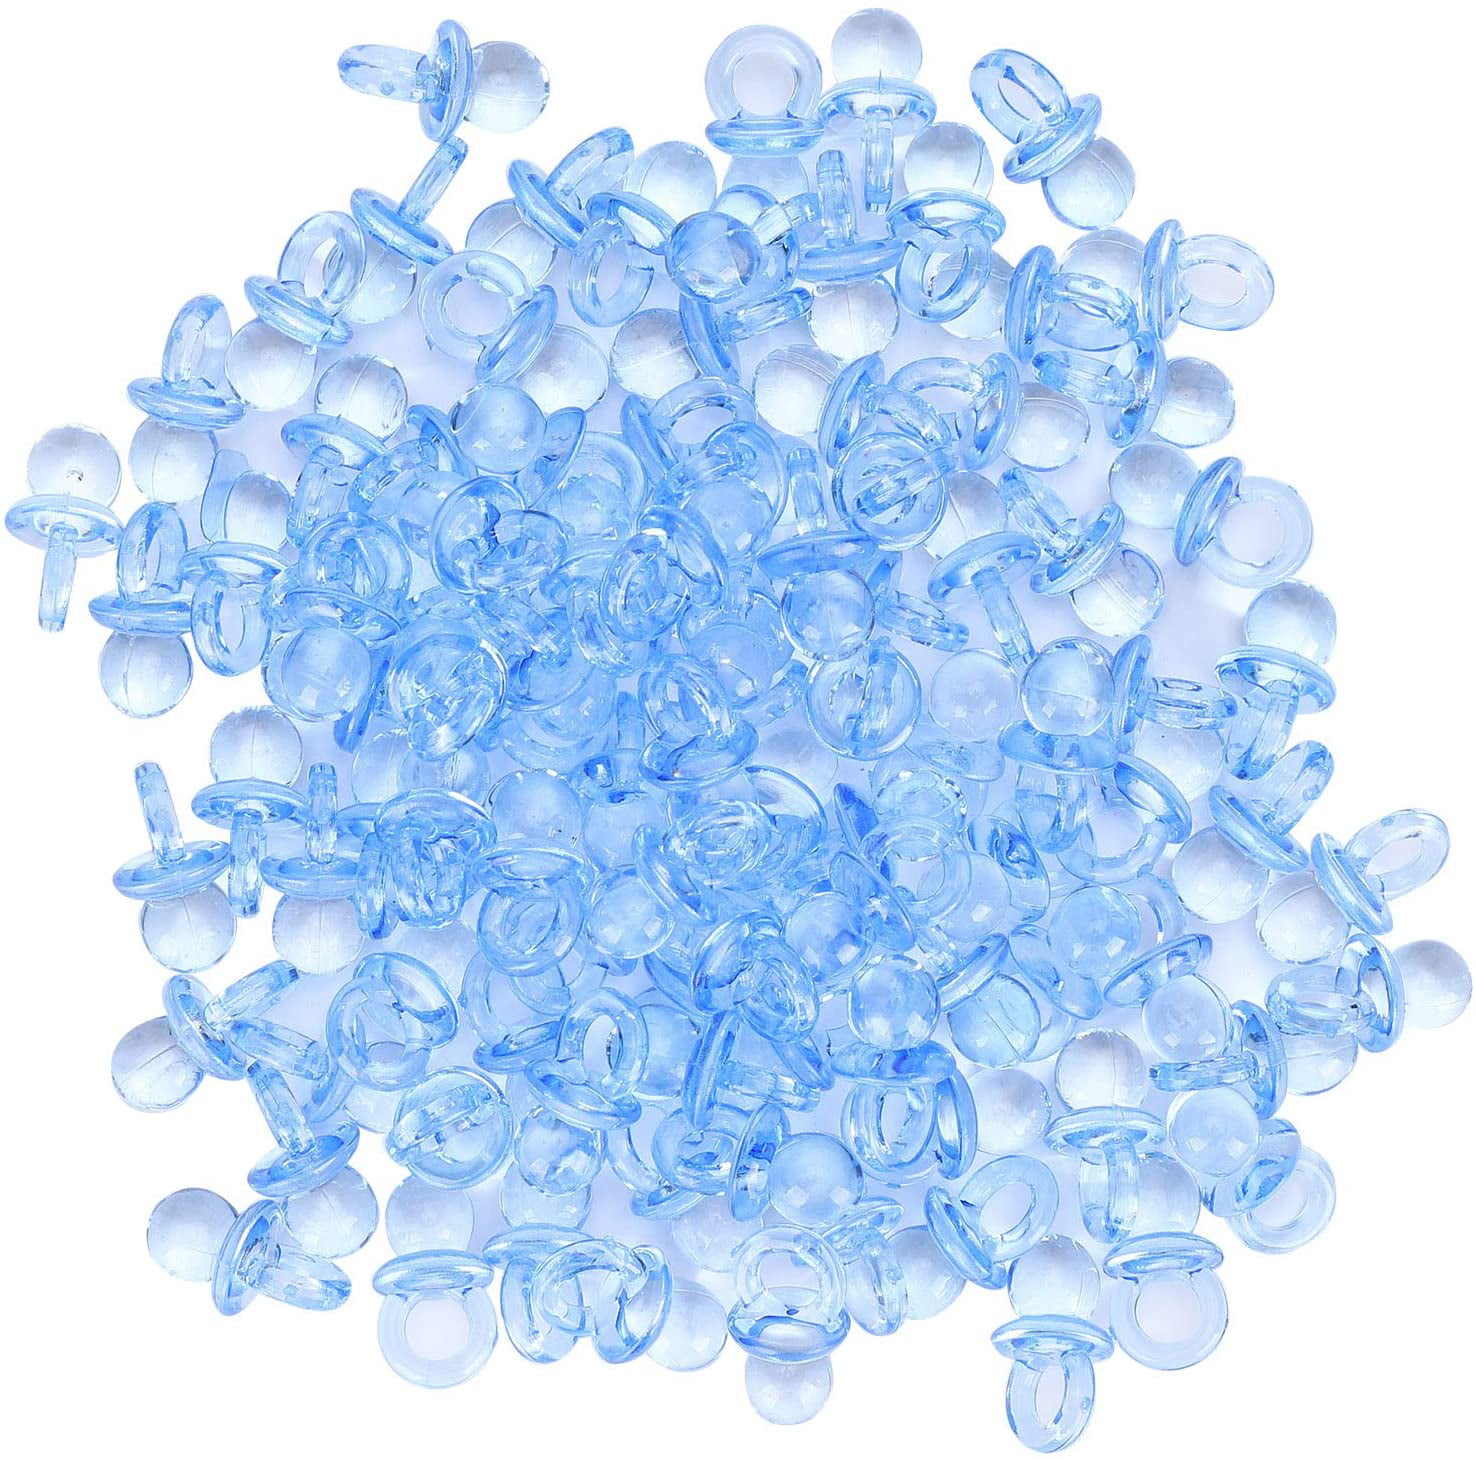 Blue 0.8x0.4x0.4in/pc Party Favors Table Scatter Games & Activities 200Pcs Acrylic Baby Pacifier for Baby Shower Decorations 